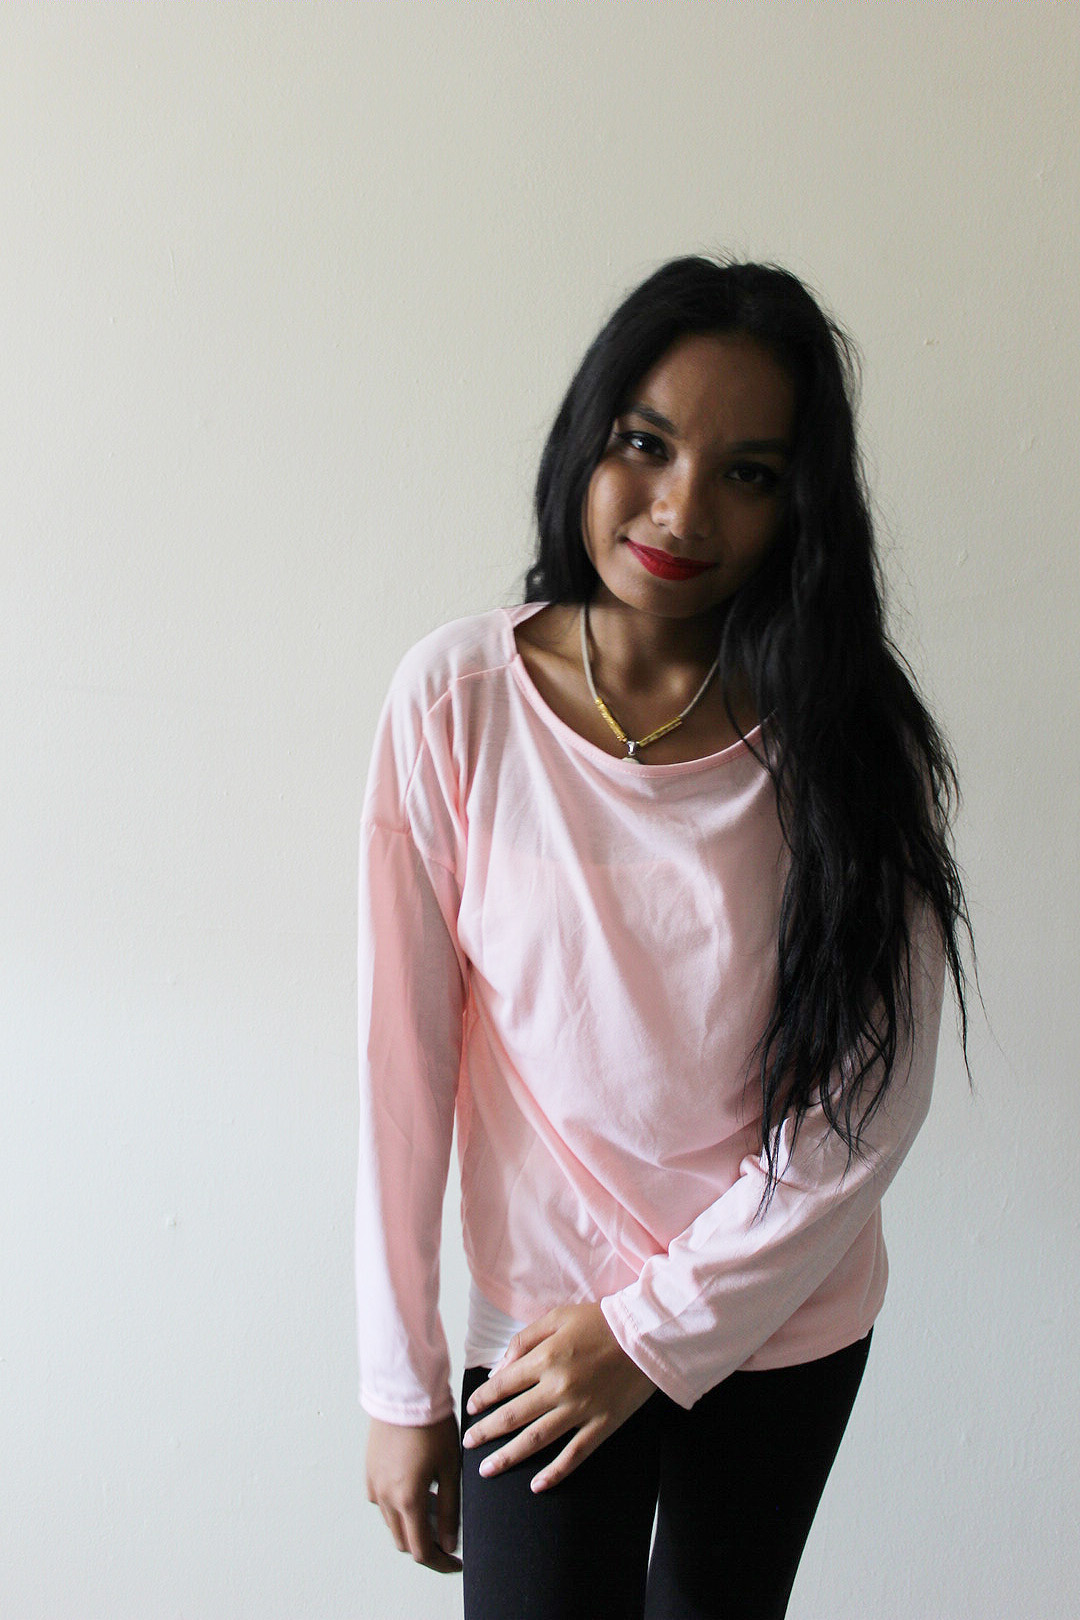 Pink-Sweater-for-Fall-Style-Blogger-Fashionista-LINDATENCHITRAN-1-1616x1080